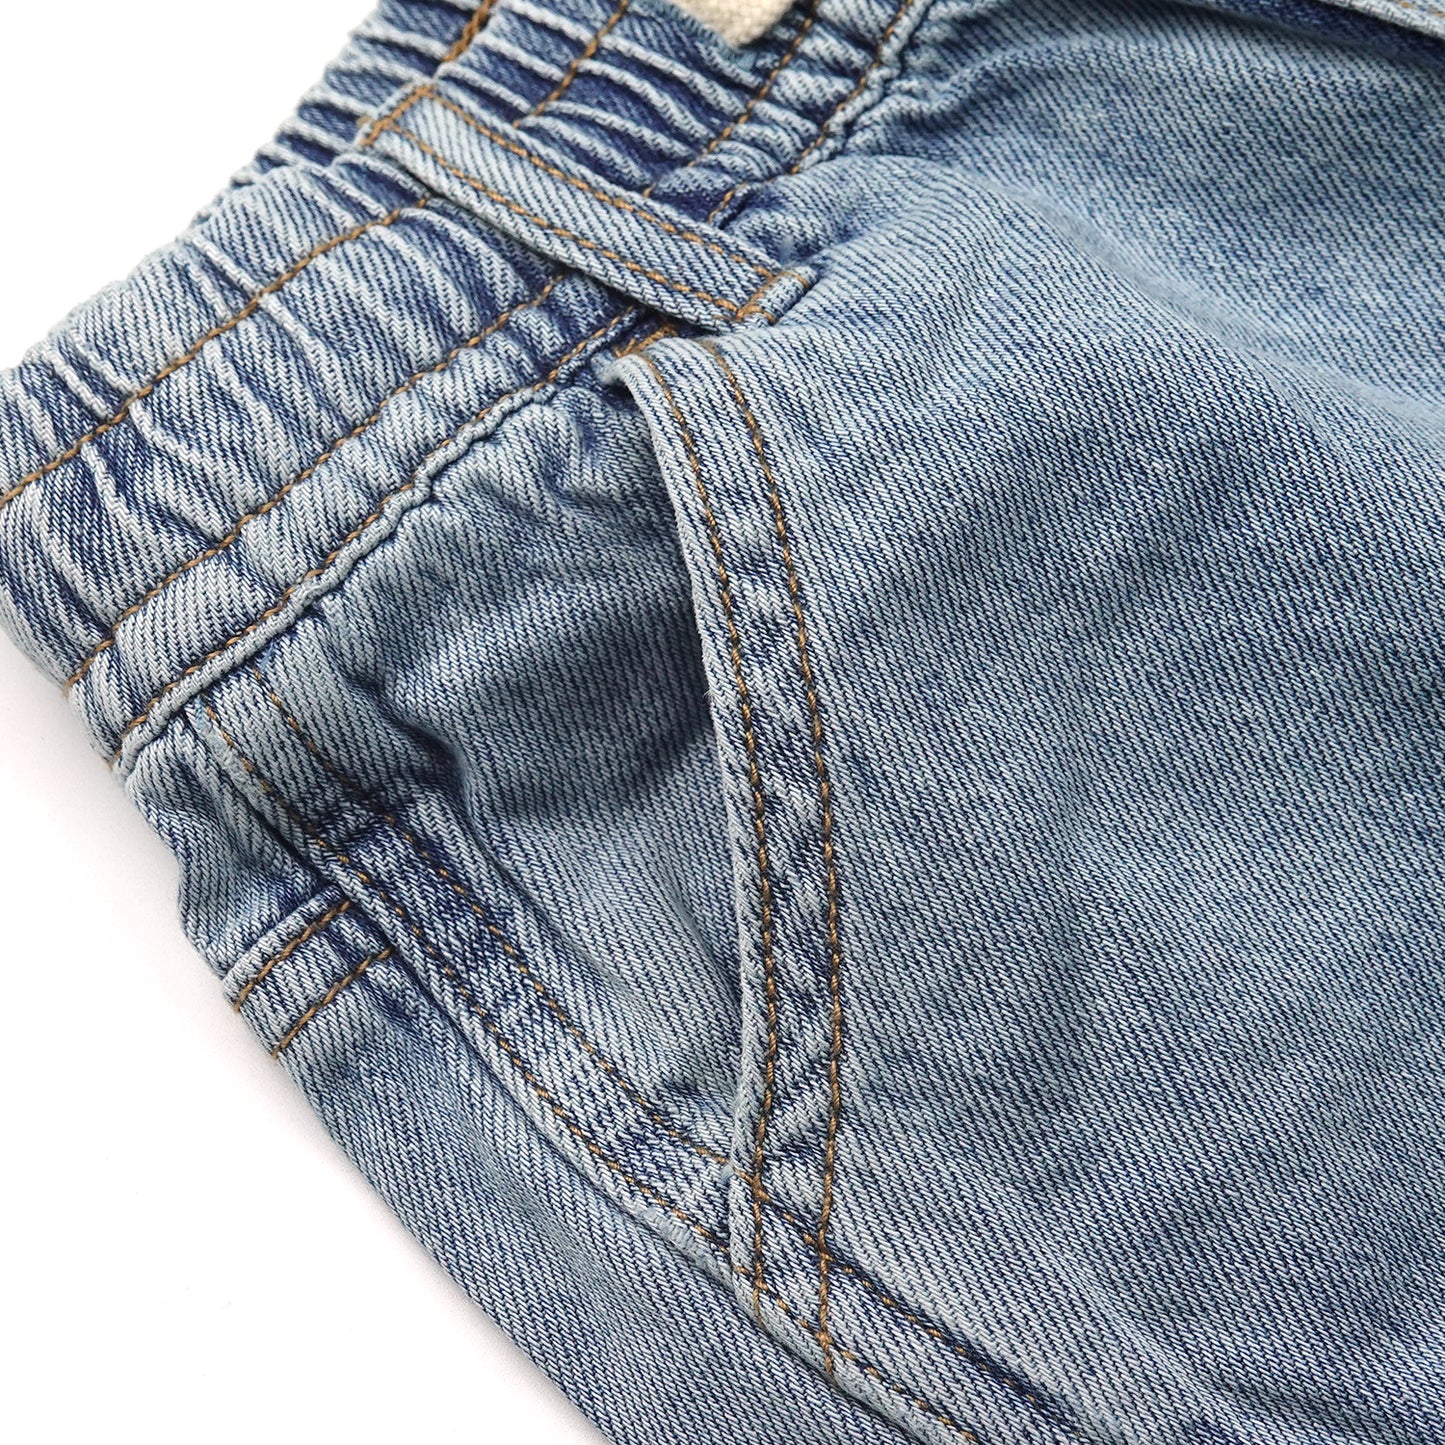 Children's Denim Shorts,Ribbed Elastic WaistBand with Strings Summer Jeans Half Pants